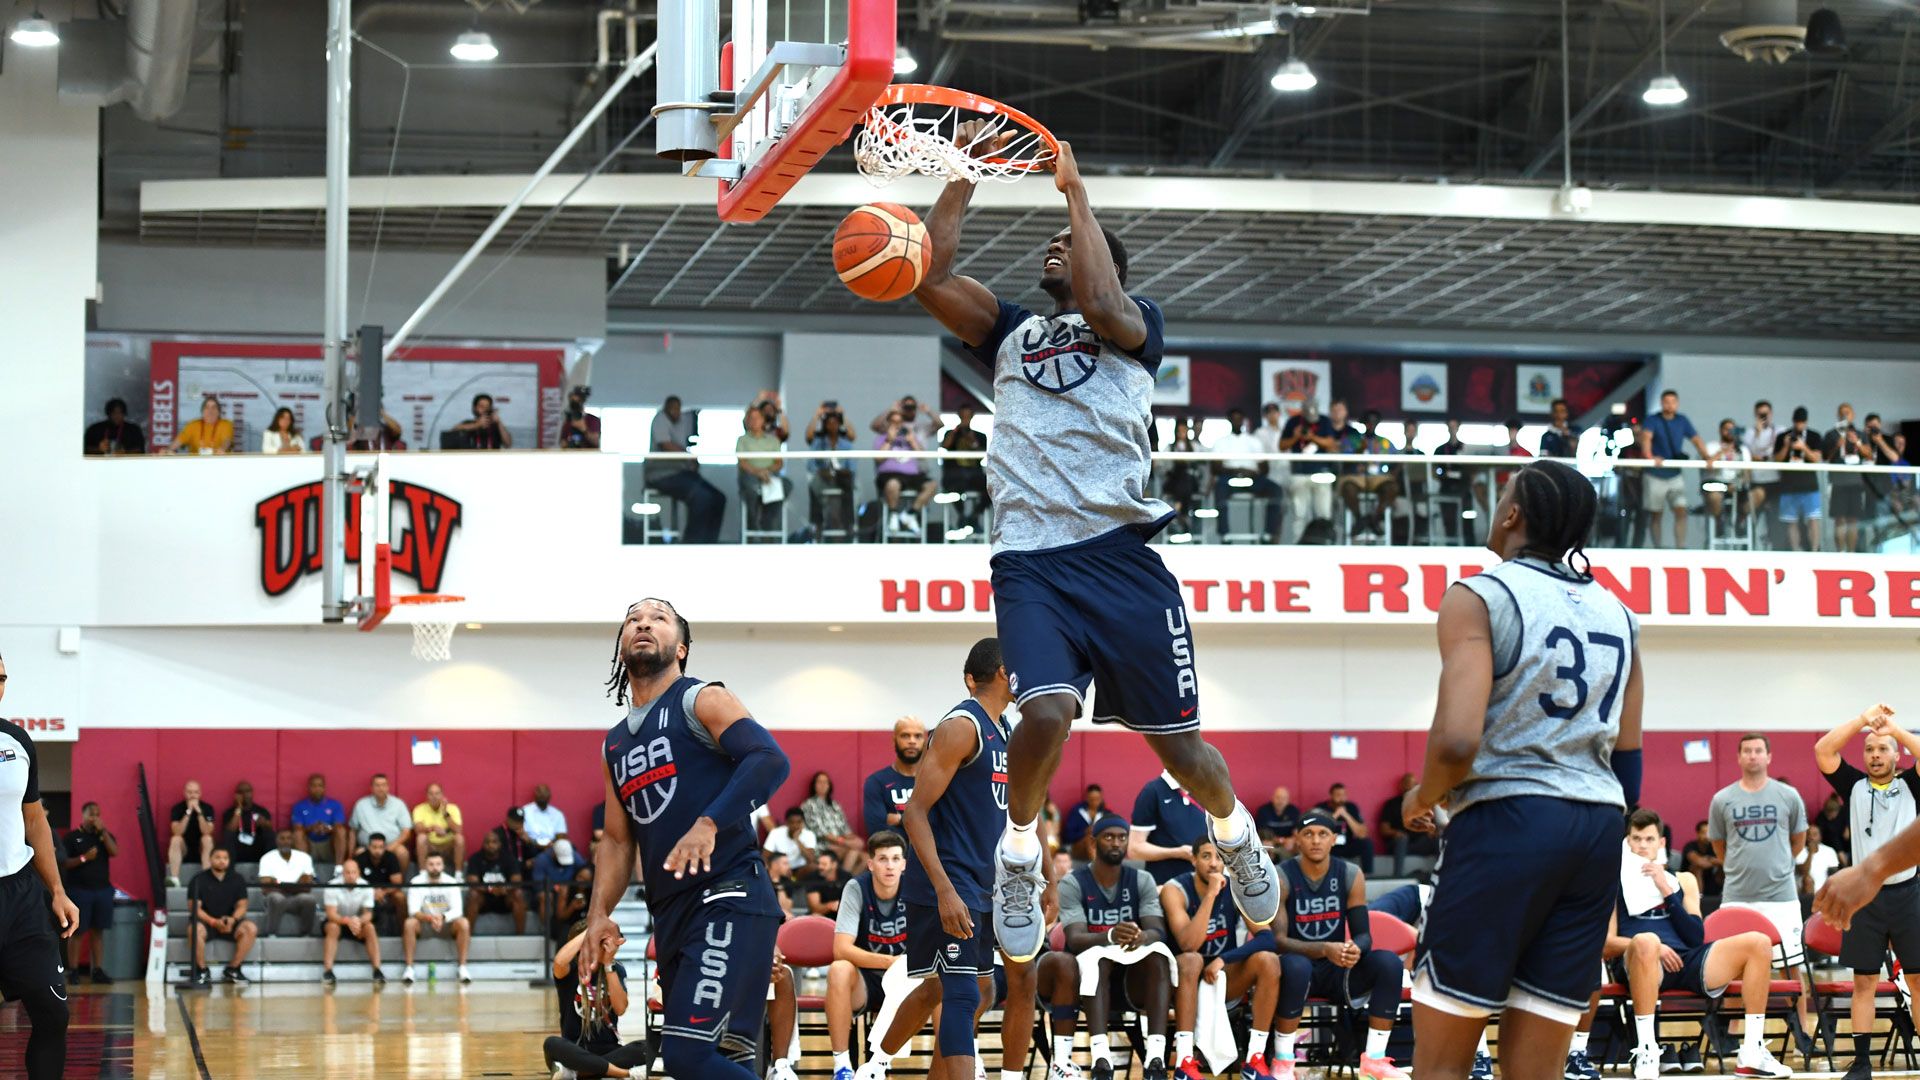 LAS VEGAS, NV - AUGUST 4: Jalen Duren dunks the ball during the USA Men's National Team Practice as part of 2023 FIBA World Cup on August 4, 2023 at the Mendenhall Center in Las Vegas, Nevada.